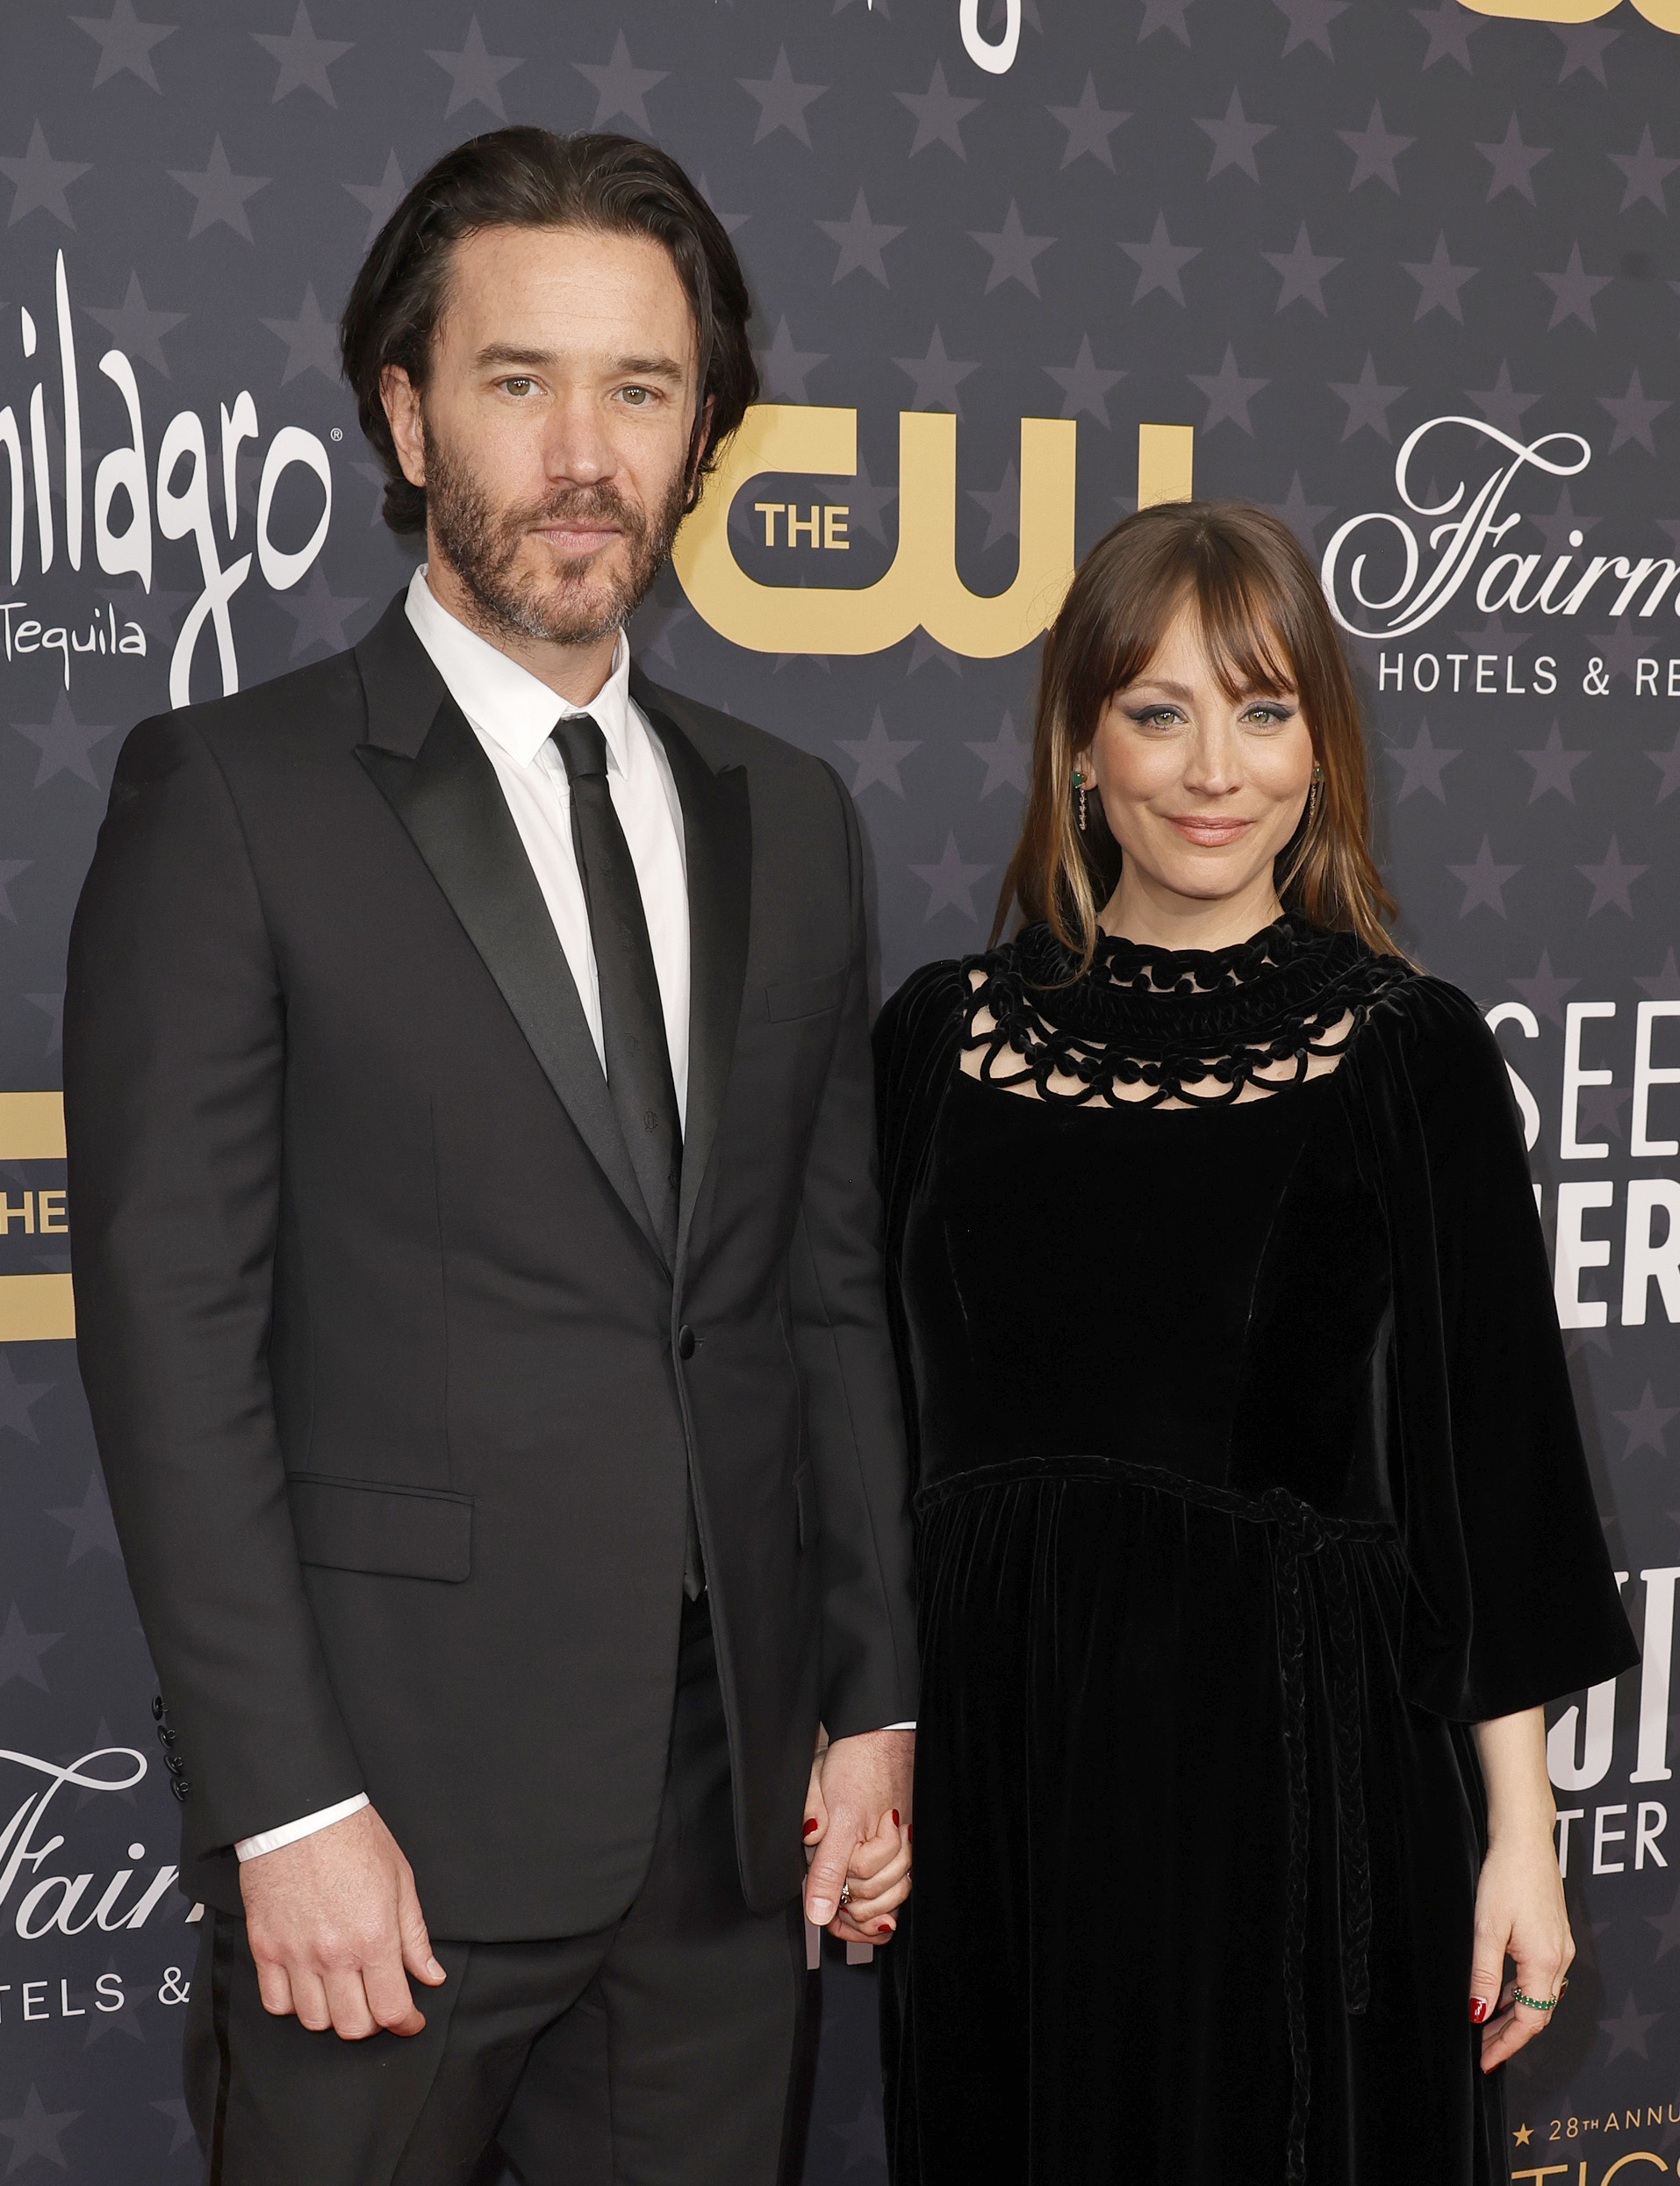 The couple holding hands at the critics choice awards